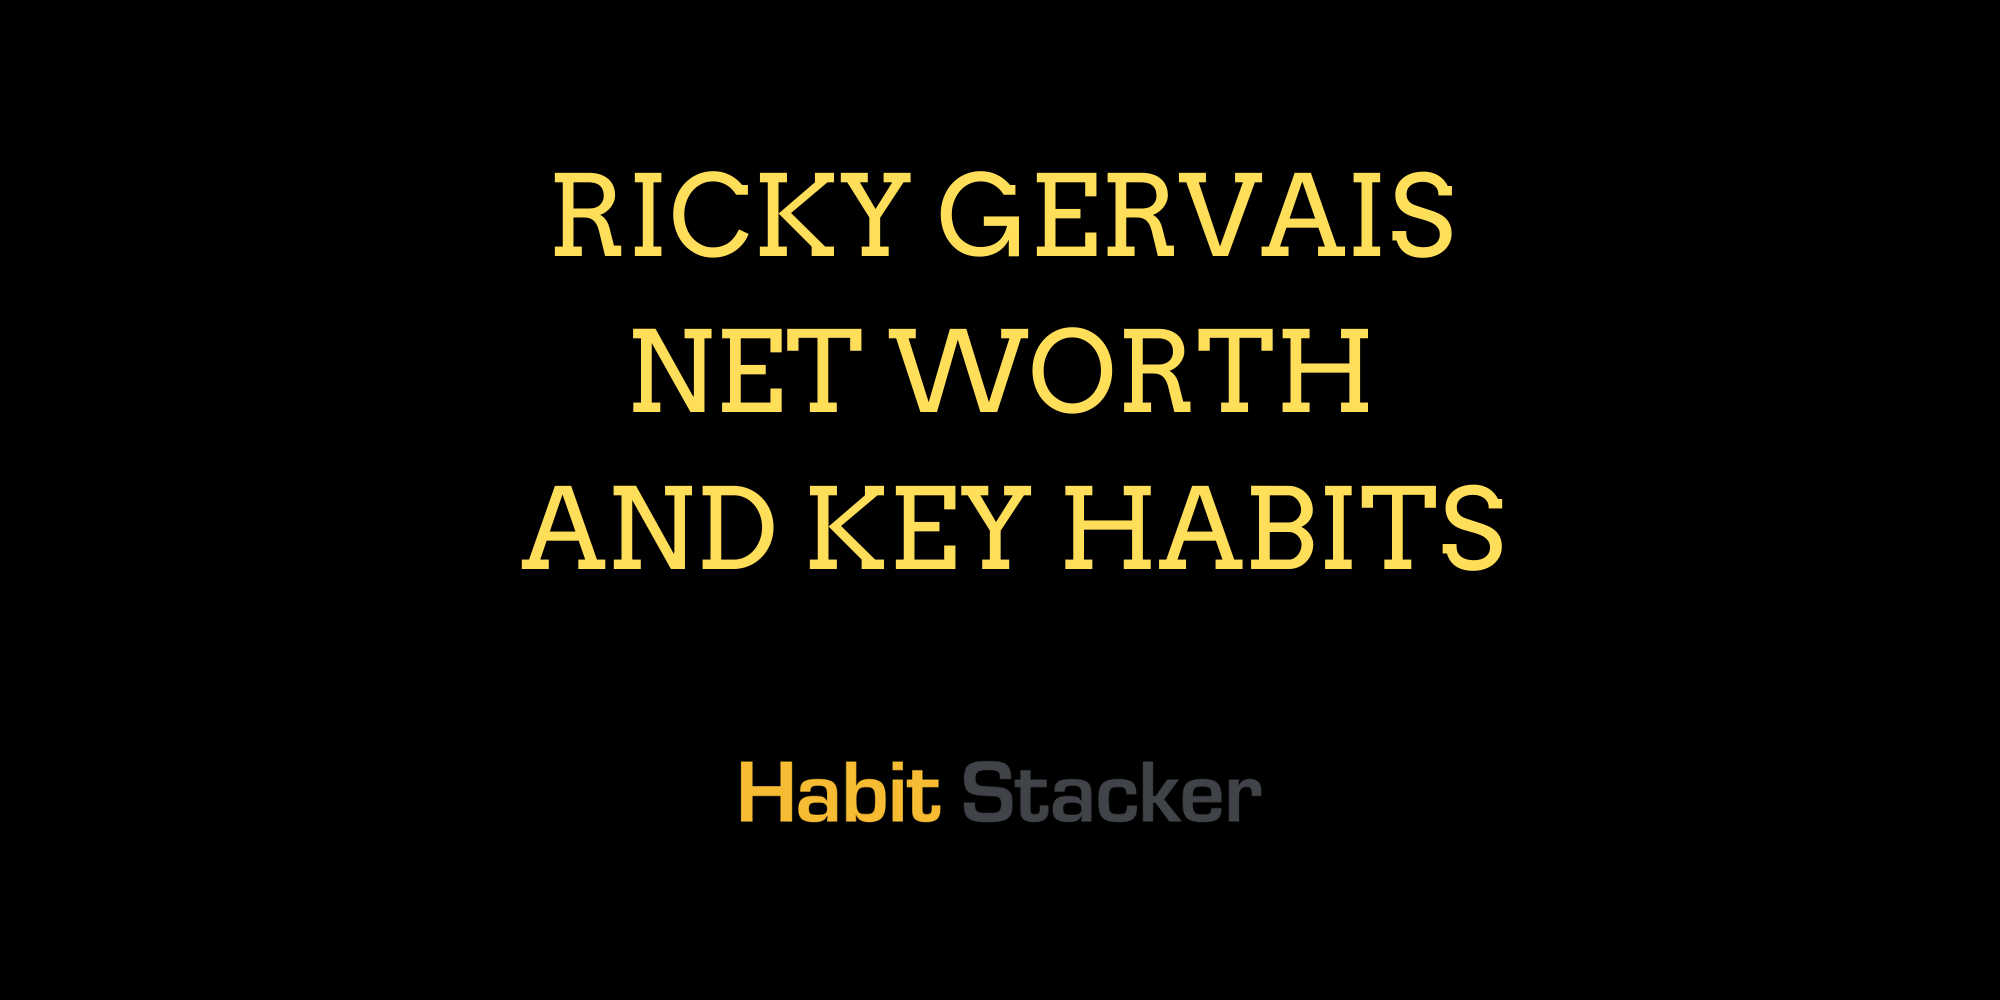 Ricky Gervais Net Worth and Key Habits